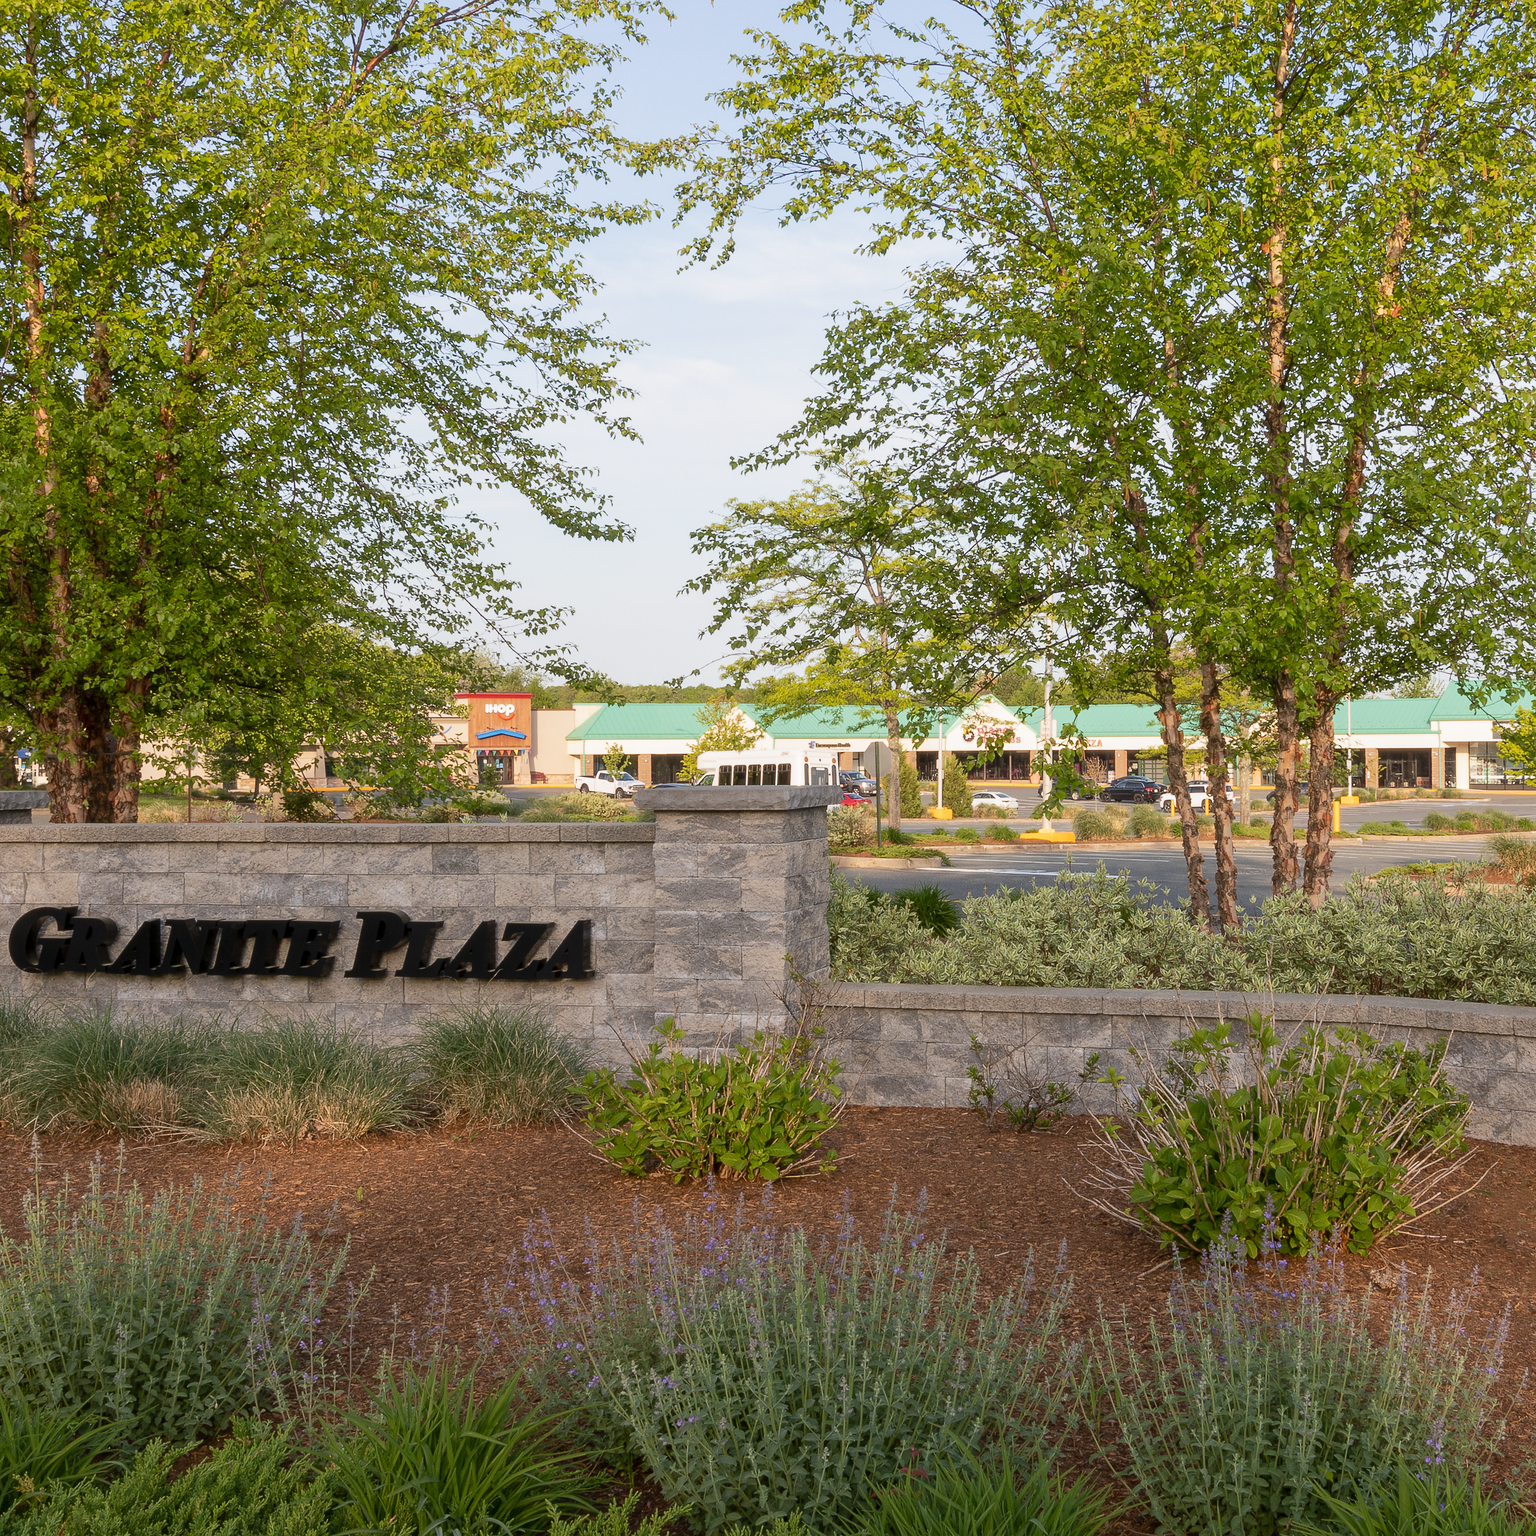 Granite Plaza Sq - with sign.png